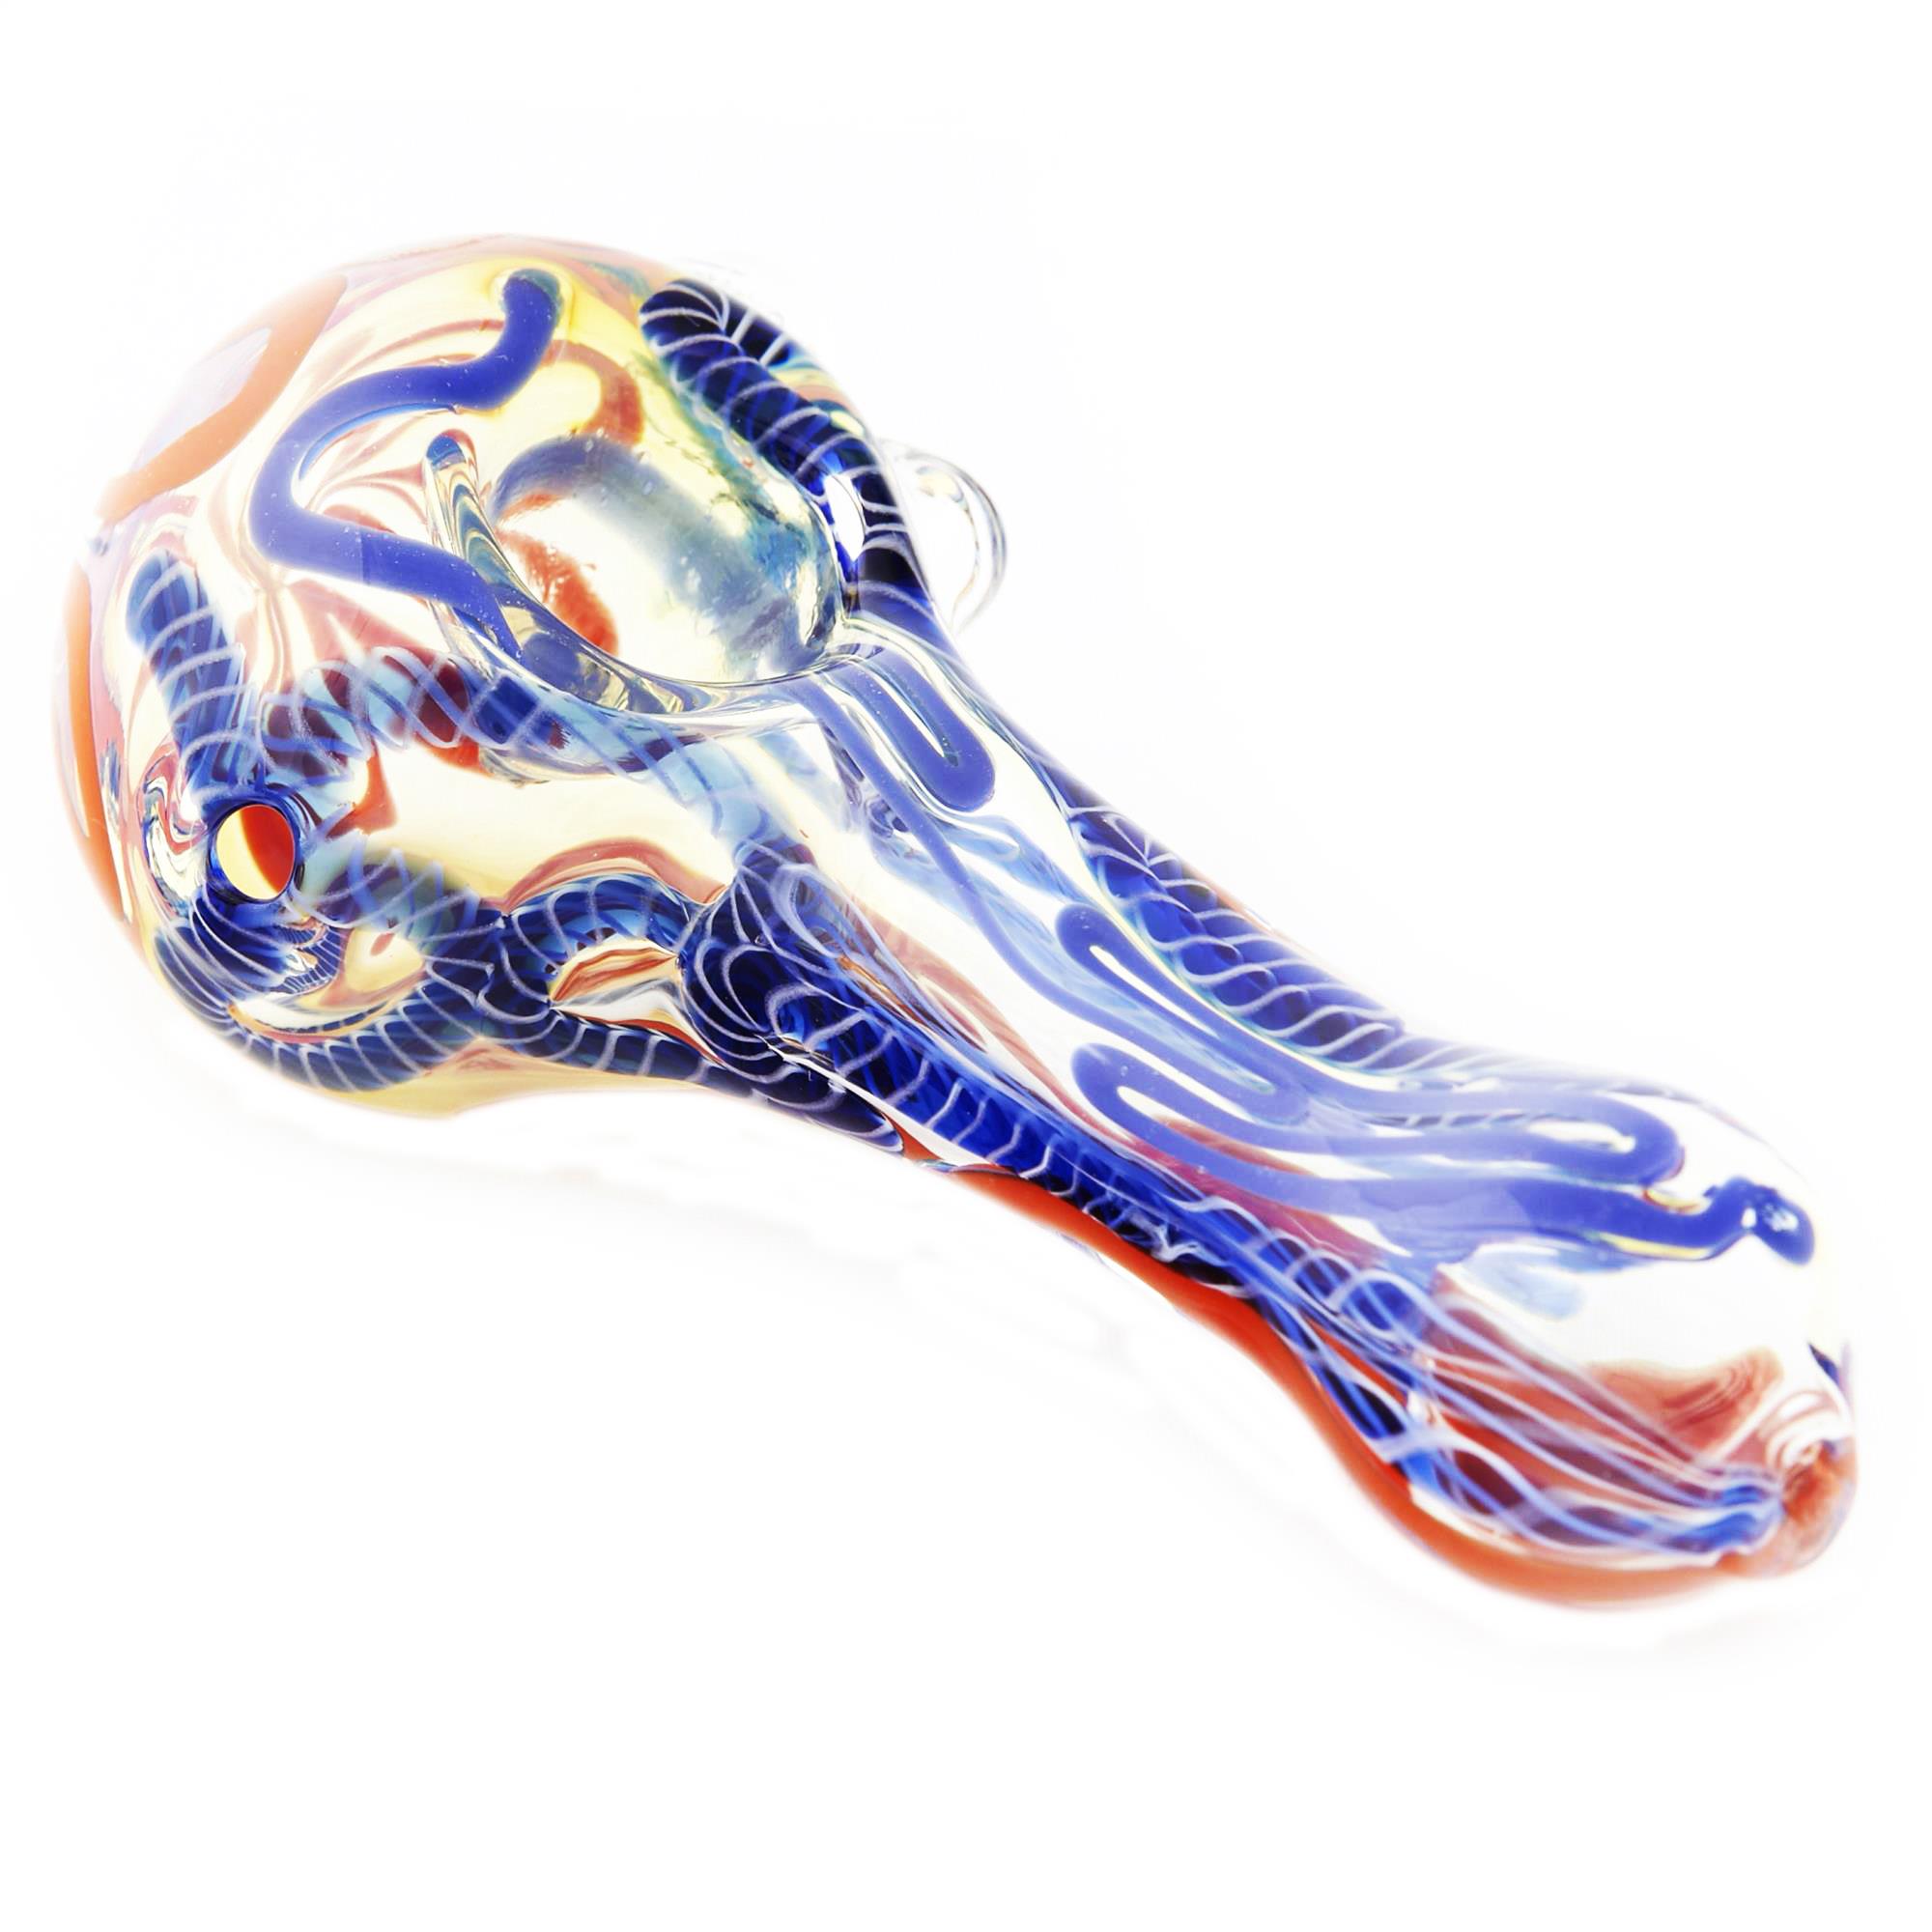 HIGH EXPECTATION SPOON PIPE